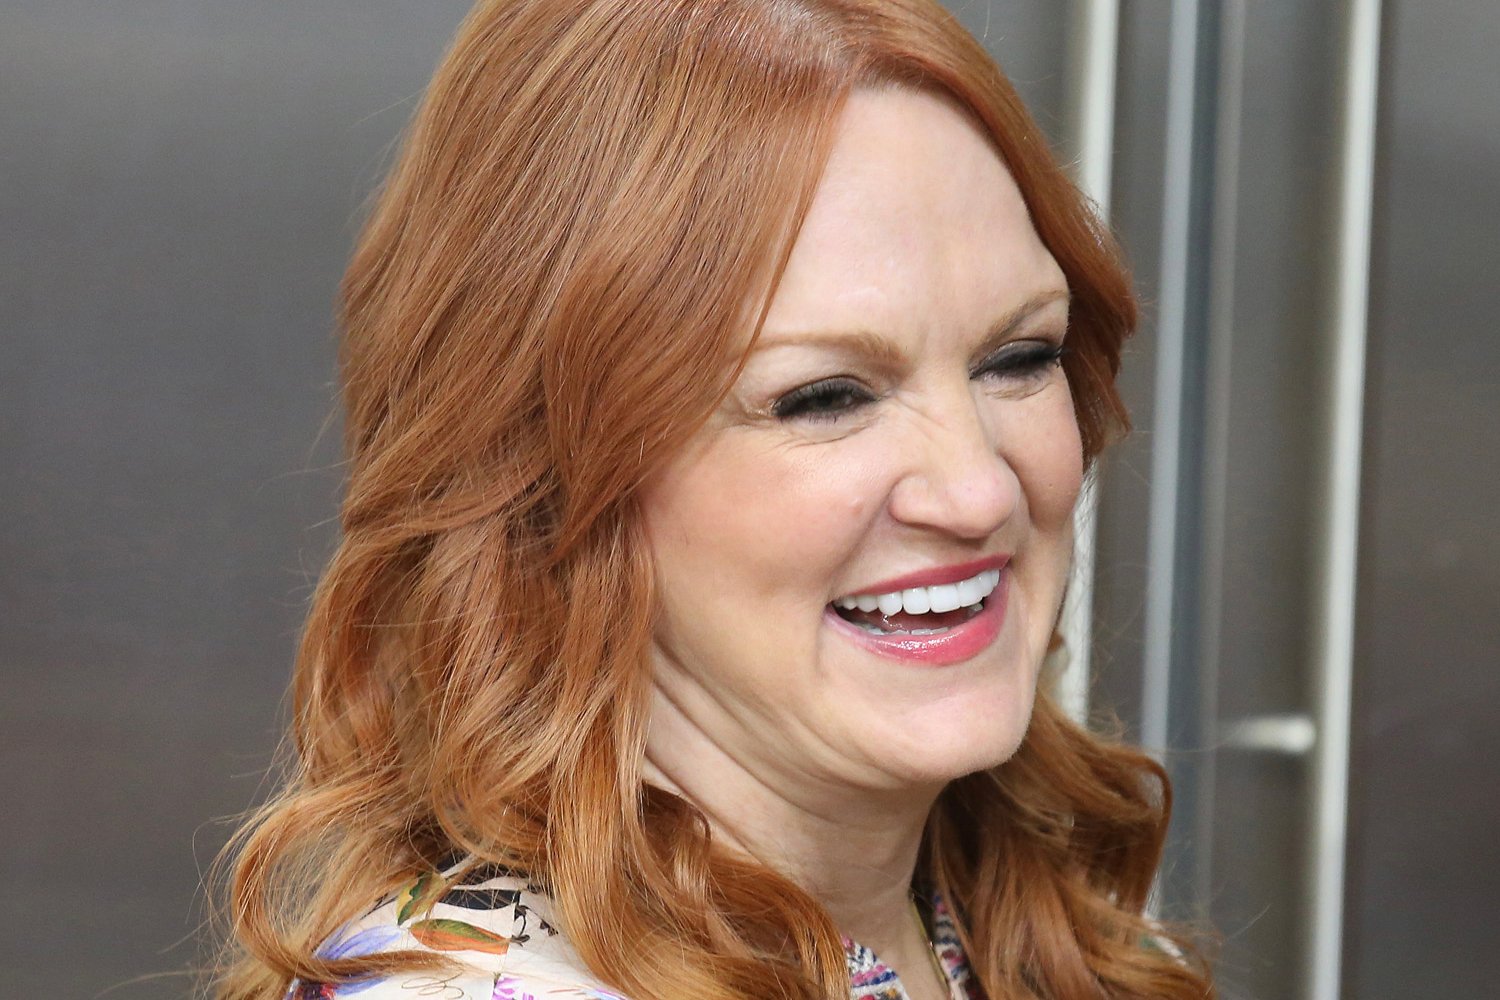 Ree Drummond smiles widely